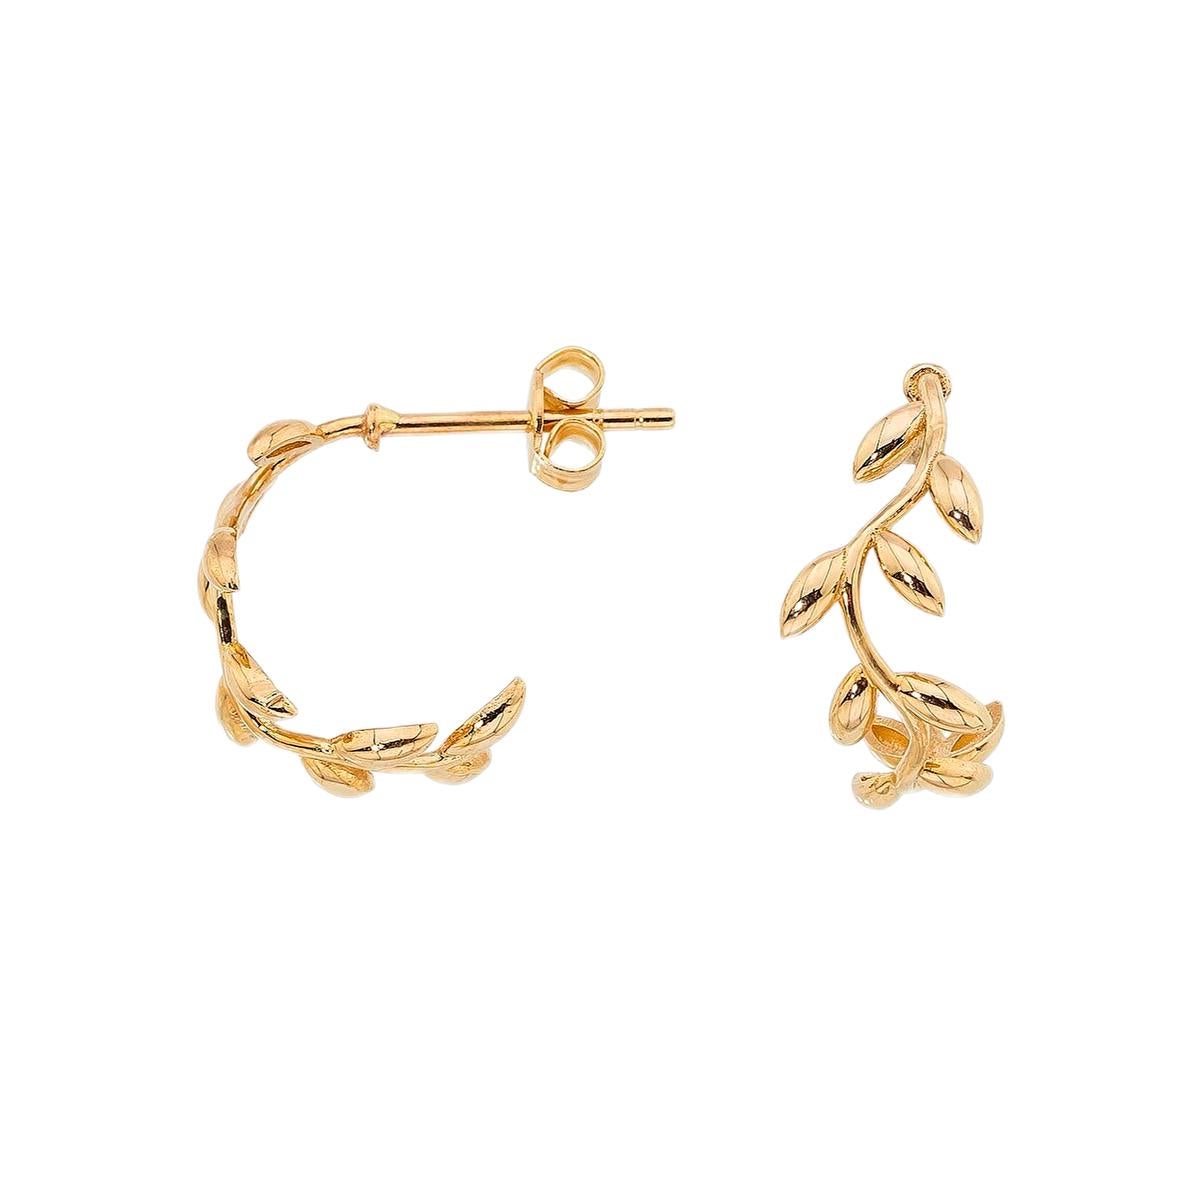  14k Gold Leaves Hoop Earrings. Olive Leaf  Stud Earrings. Dangle Plant Wedding Earrings. 

Total weight: 1.65 g.
Closure: stud
Earring size: 15x7mm
Style: Minimalist, floral
Sold as a pair.

This earrings - ready to ship in 3 working days. 
The